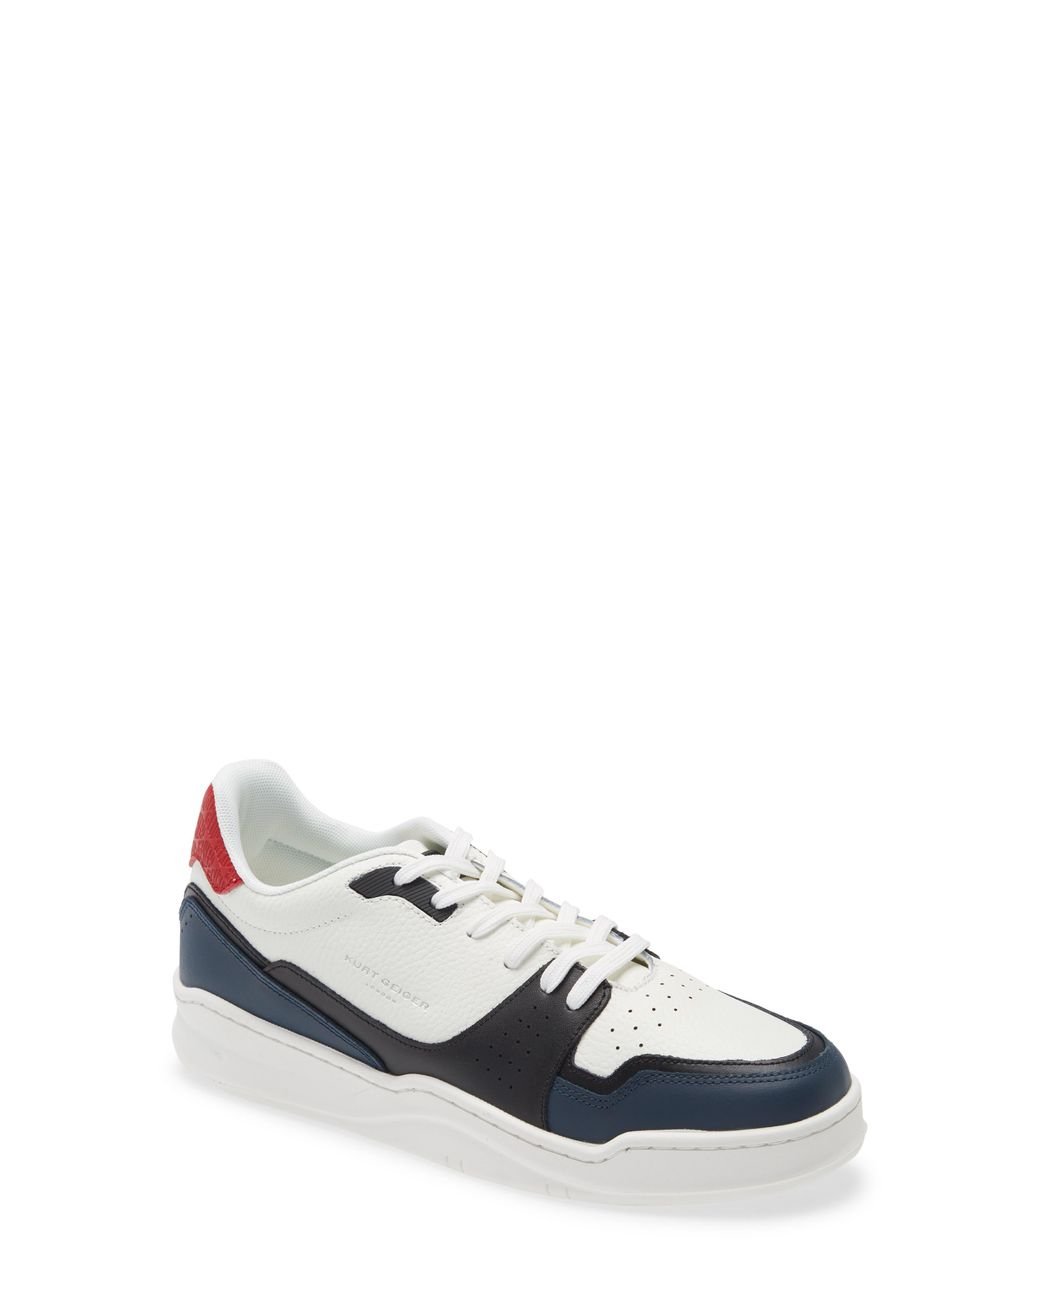 Kurt Geiger Frankie Low Top Sneaker in White Leather (White) for Men - Lyst